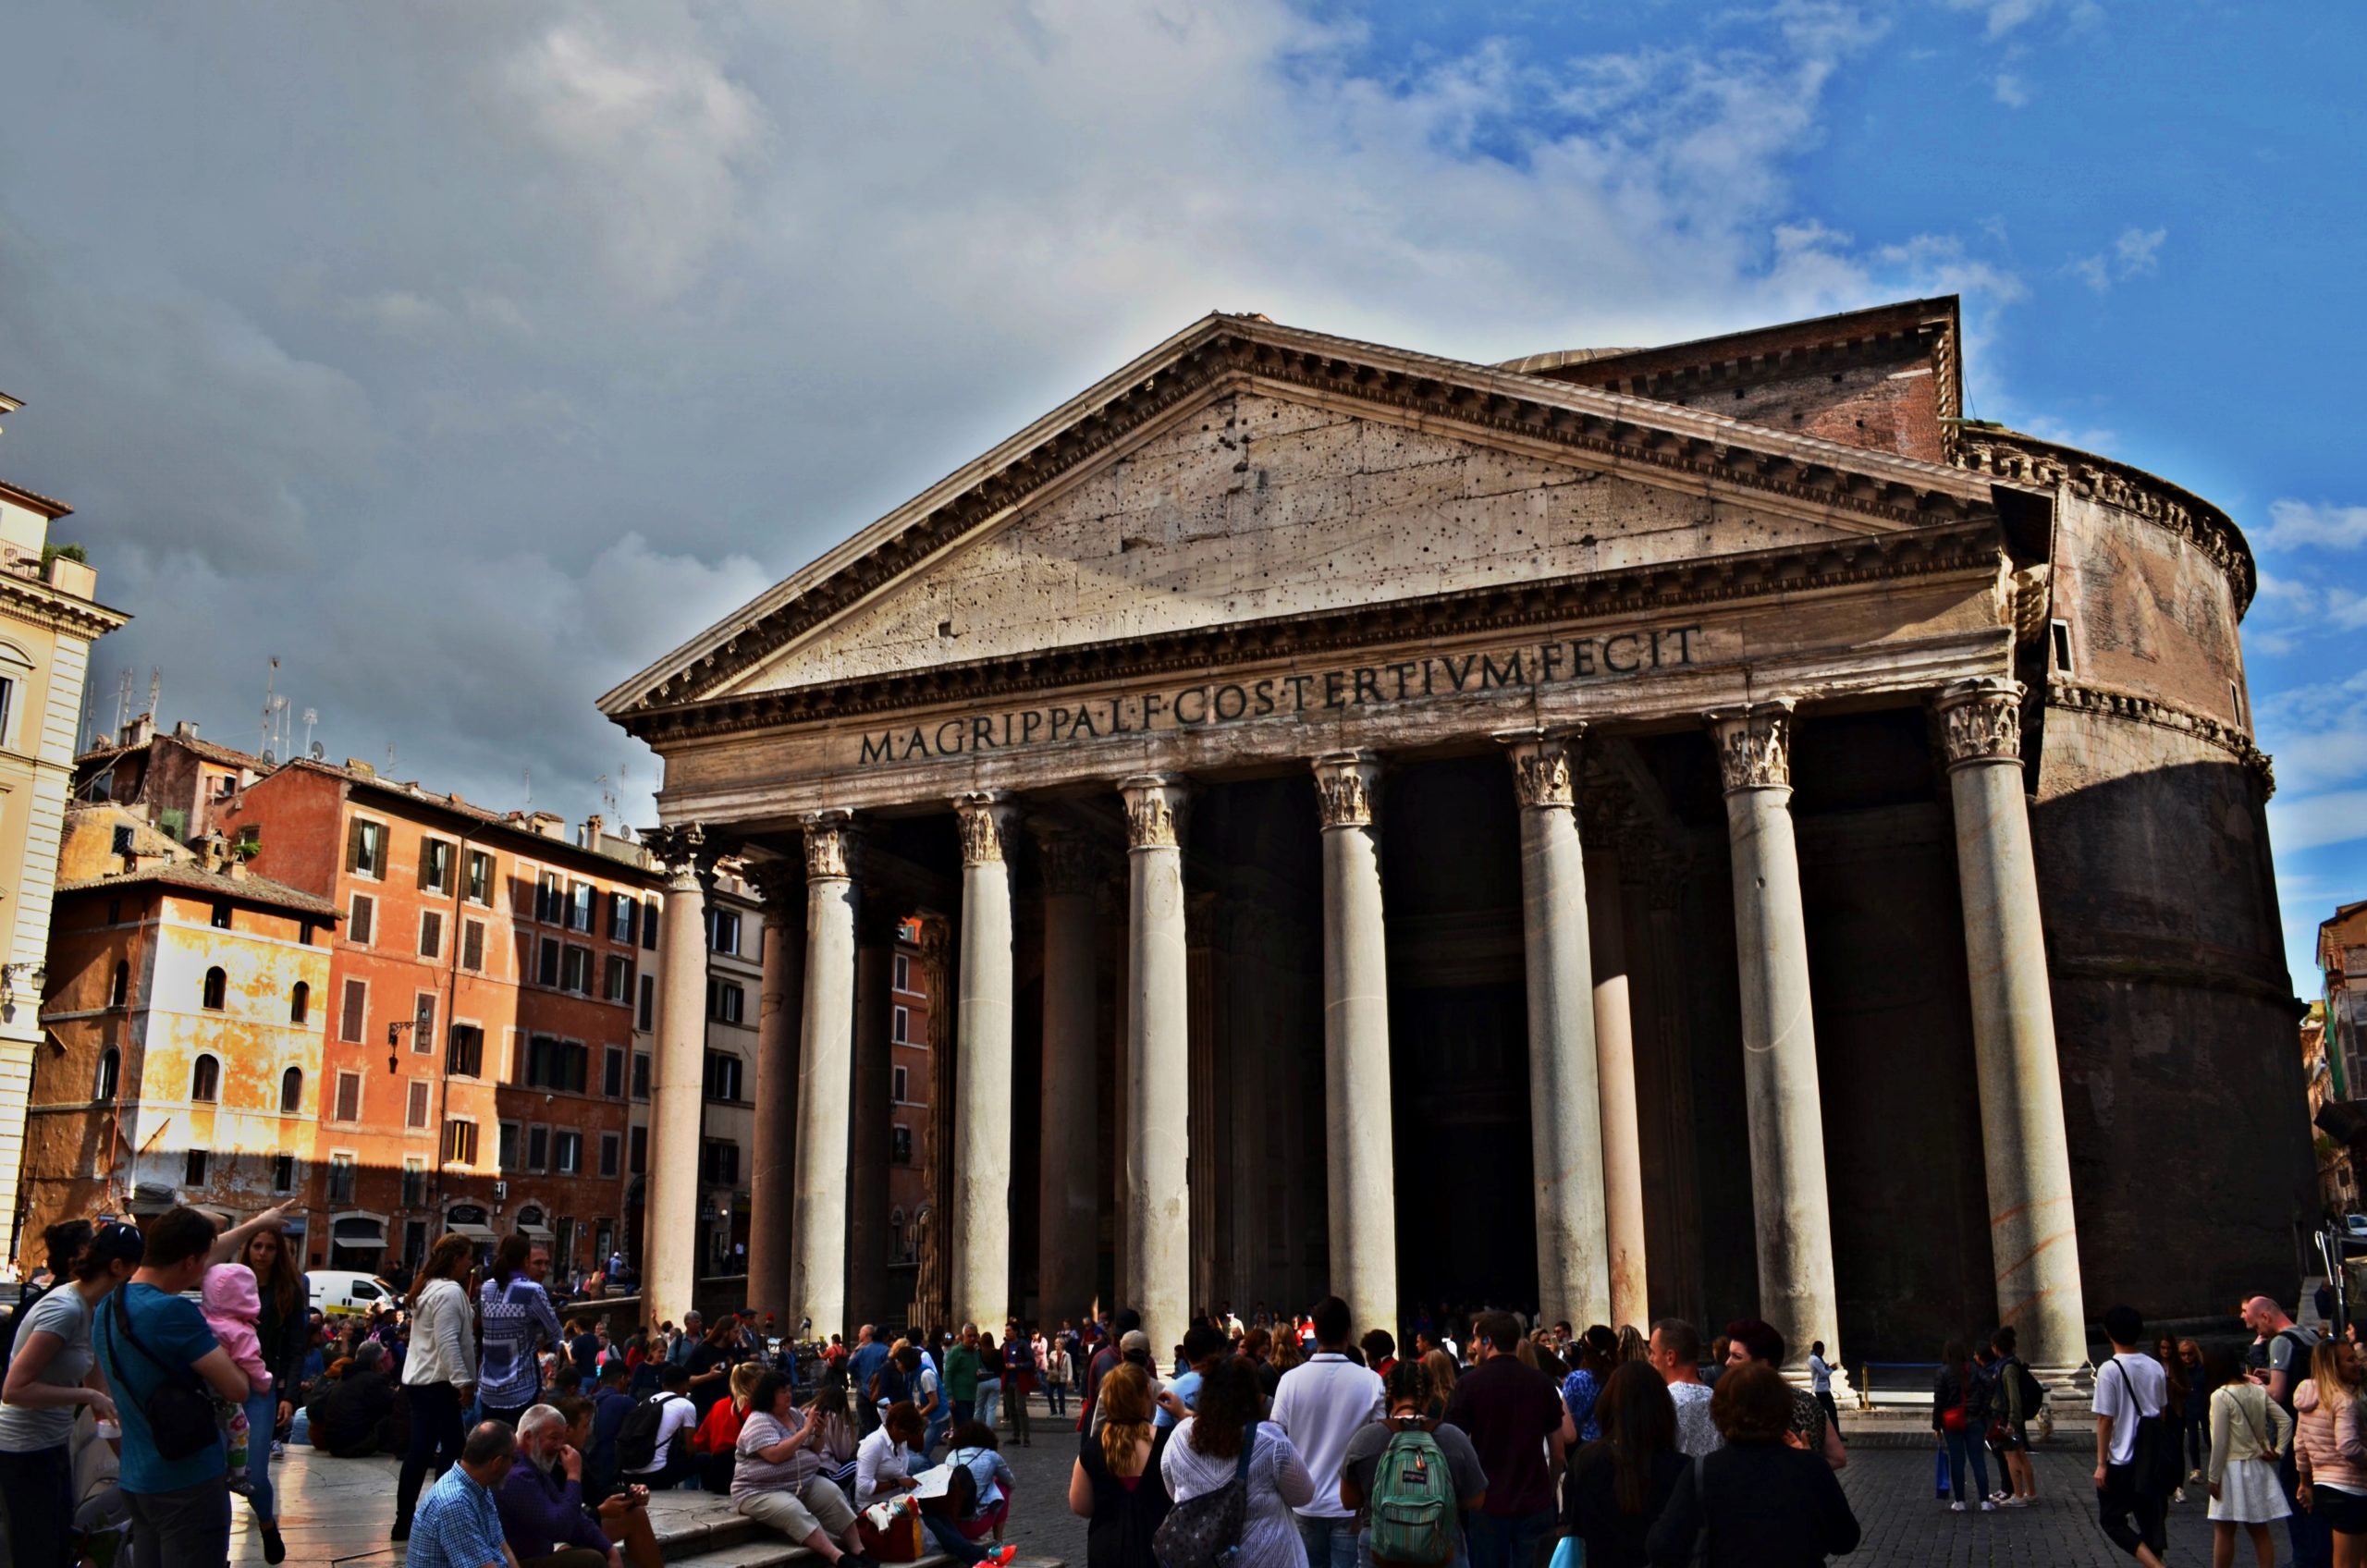 After 2000 years, Pantheon still stands firm. View of the Pantheon with blue sky in the background